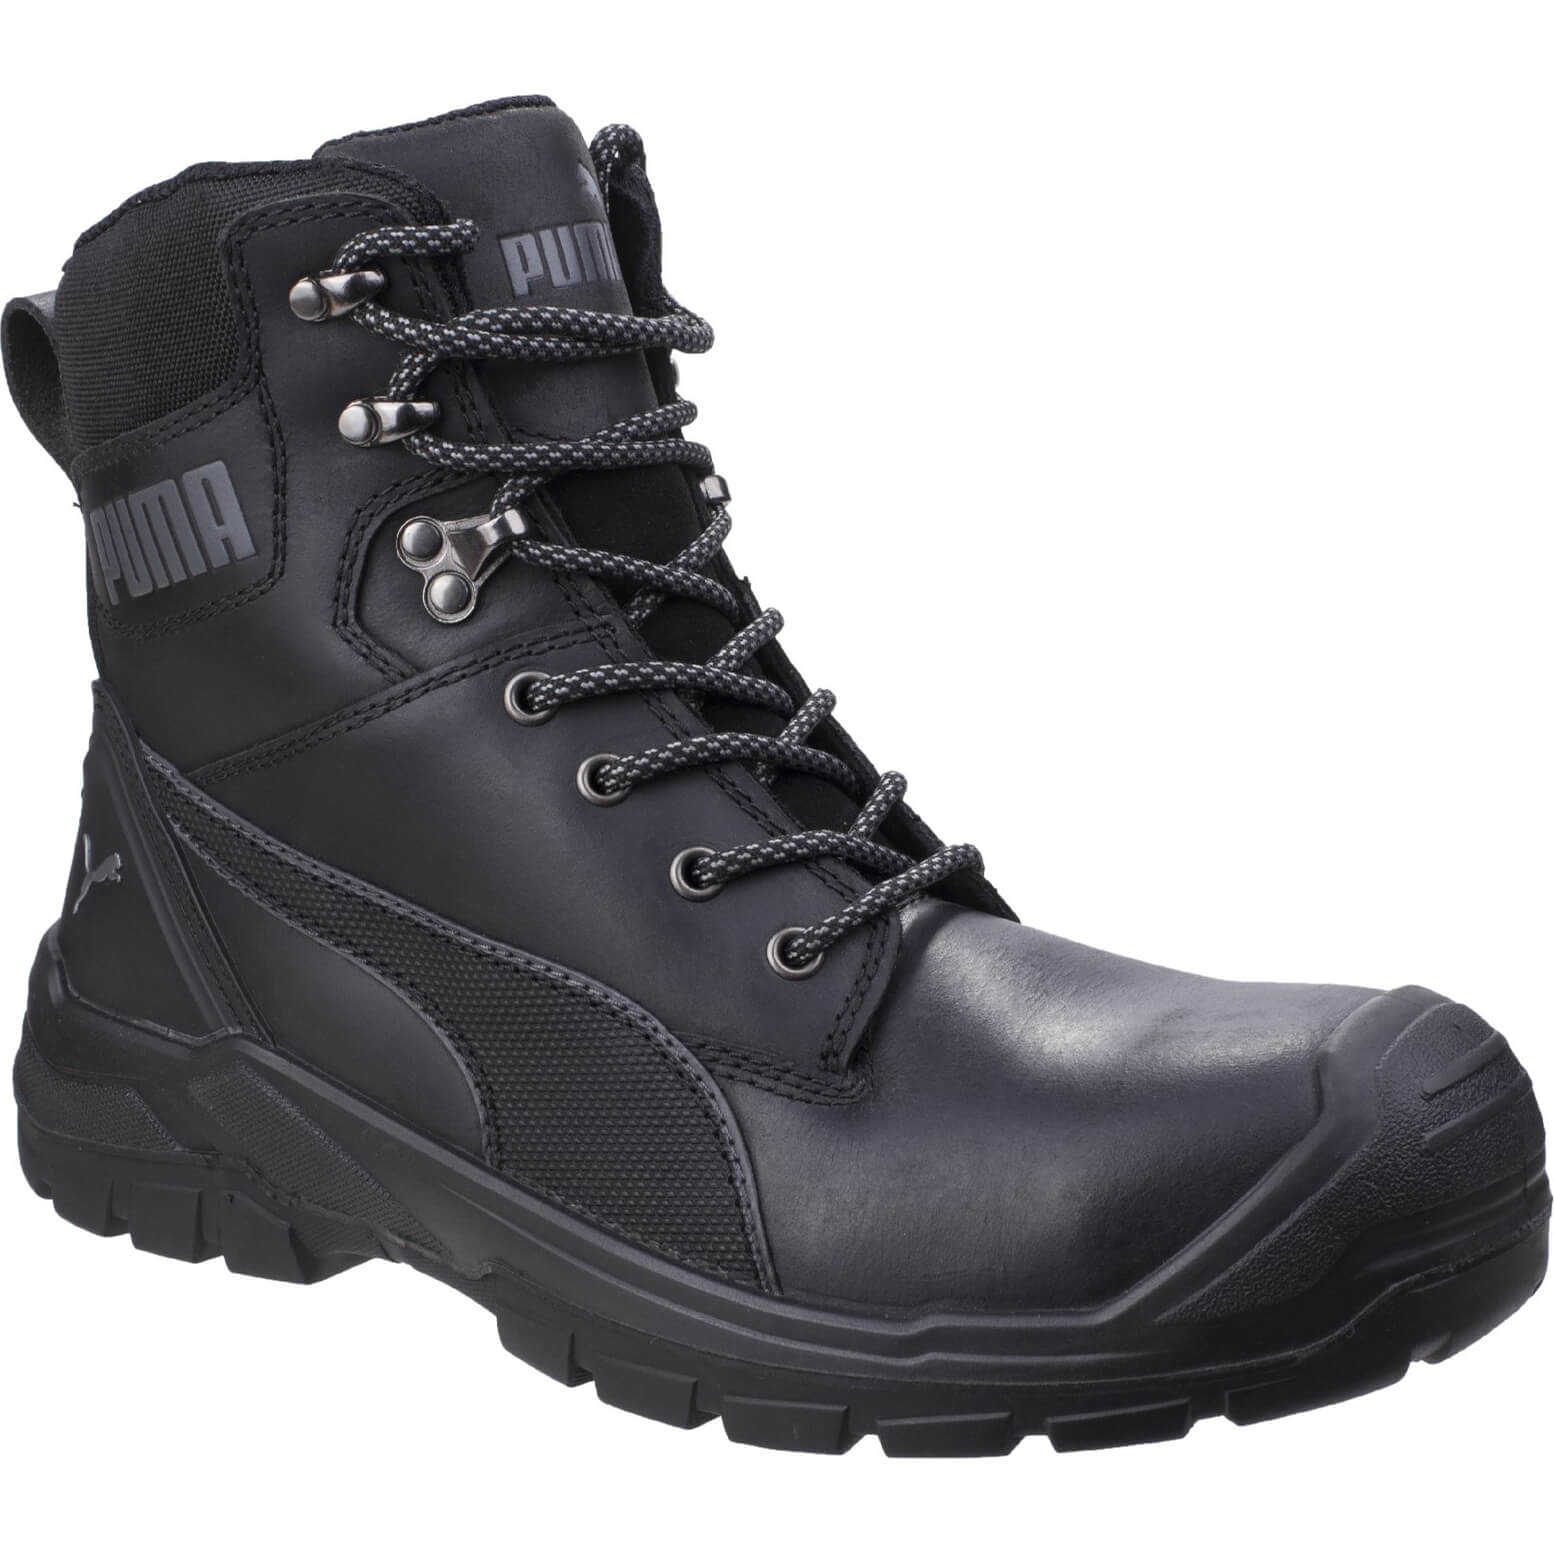 Image of Puma Mens Safety Conquest High Safety Boots Black Size 8